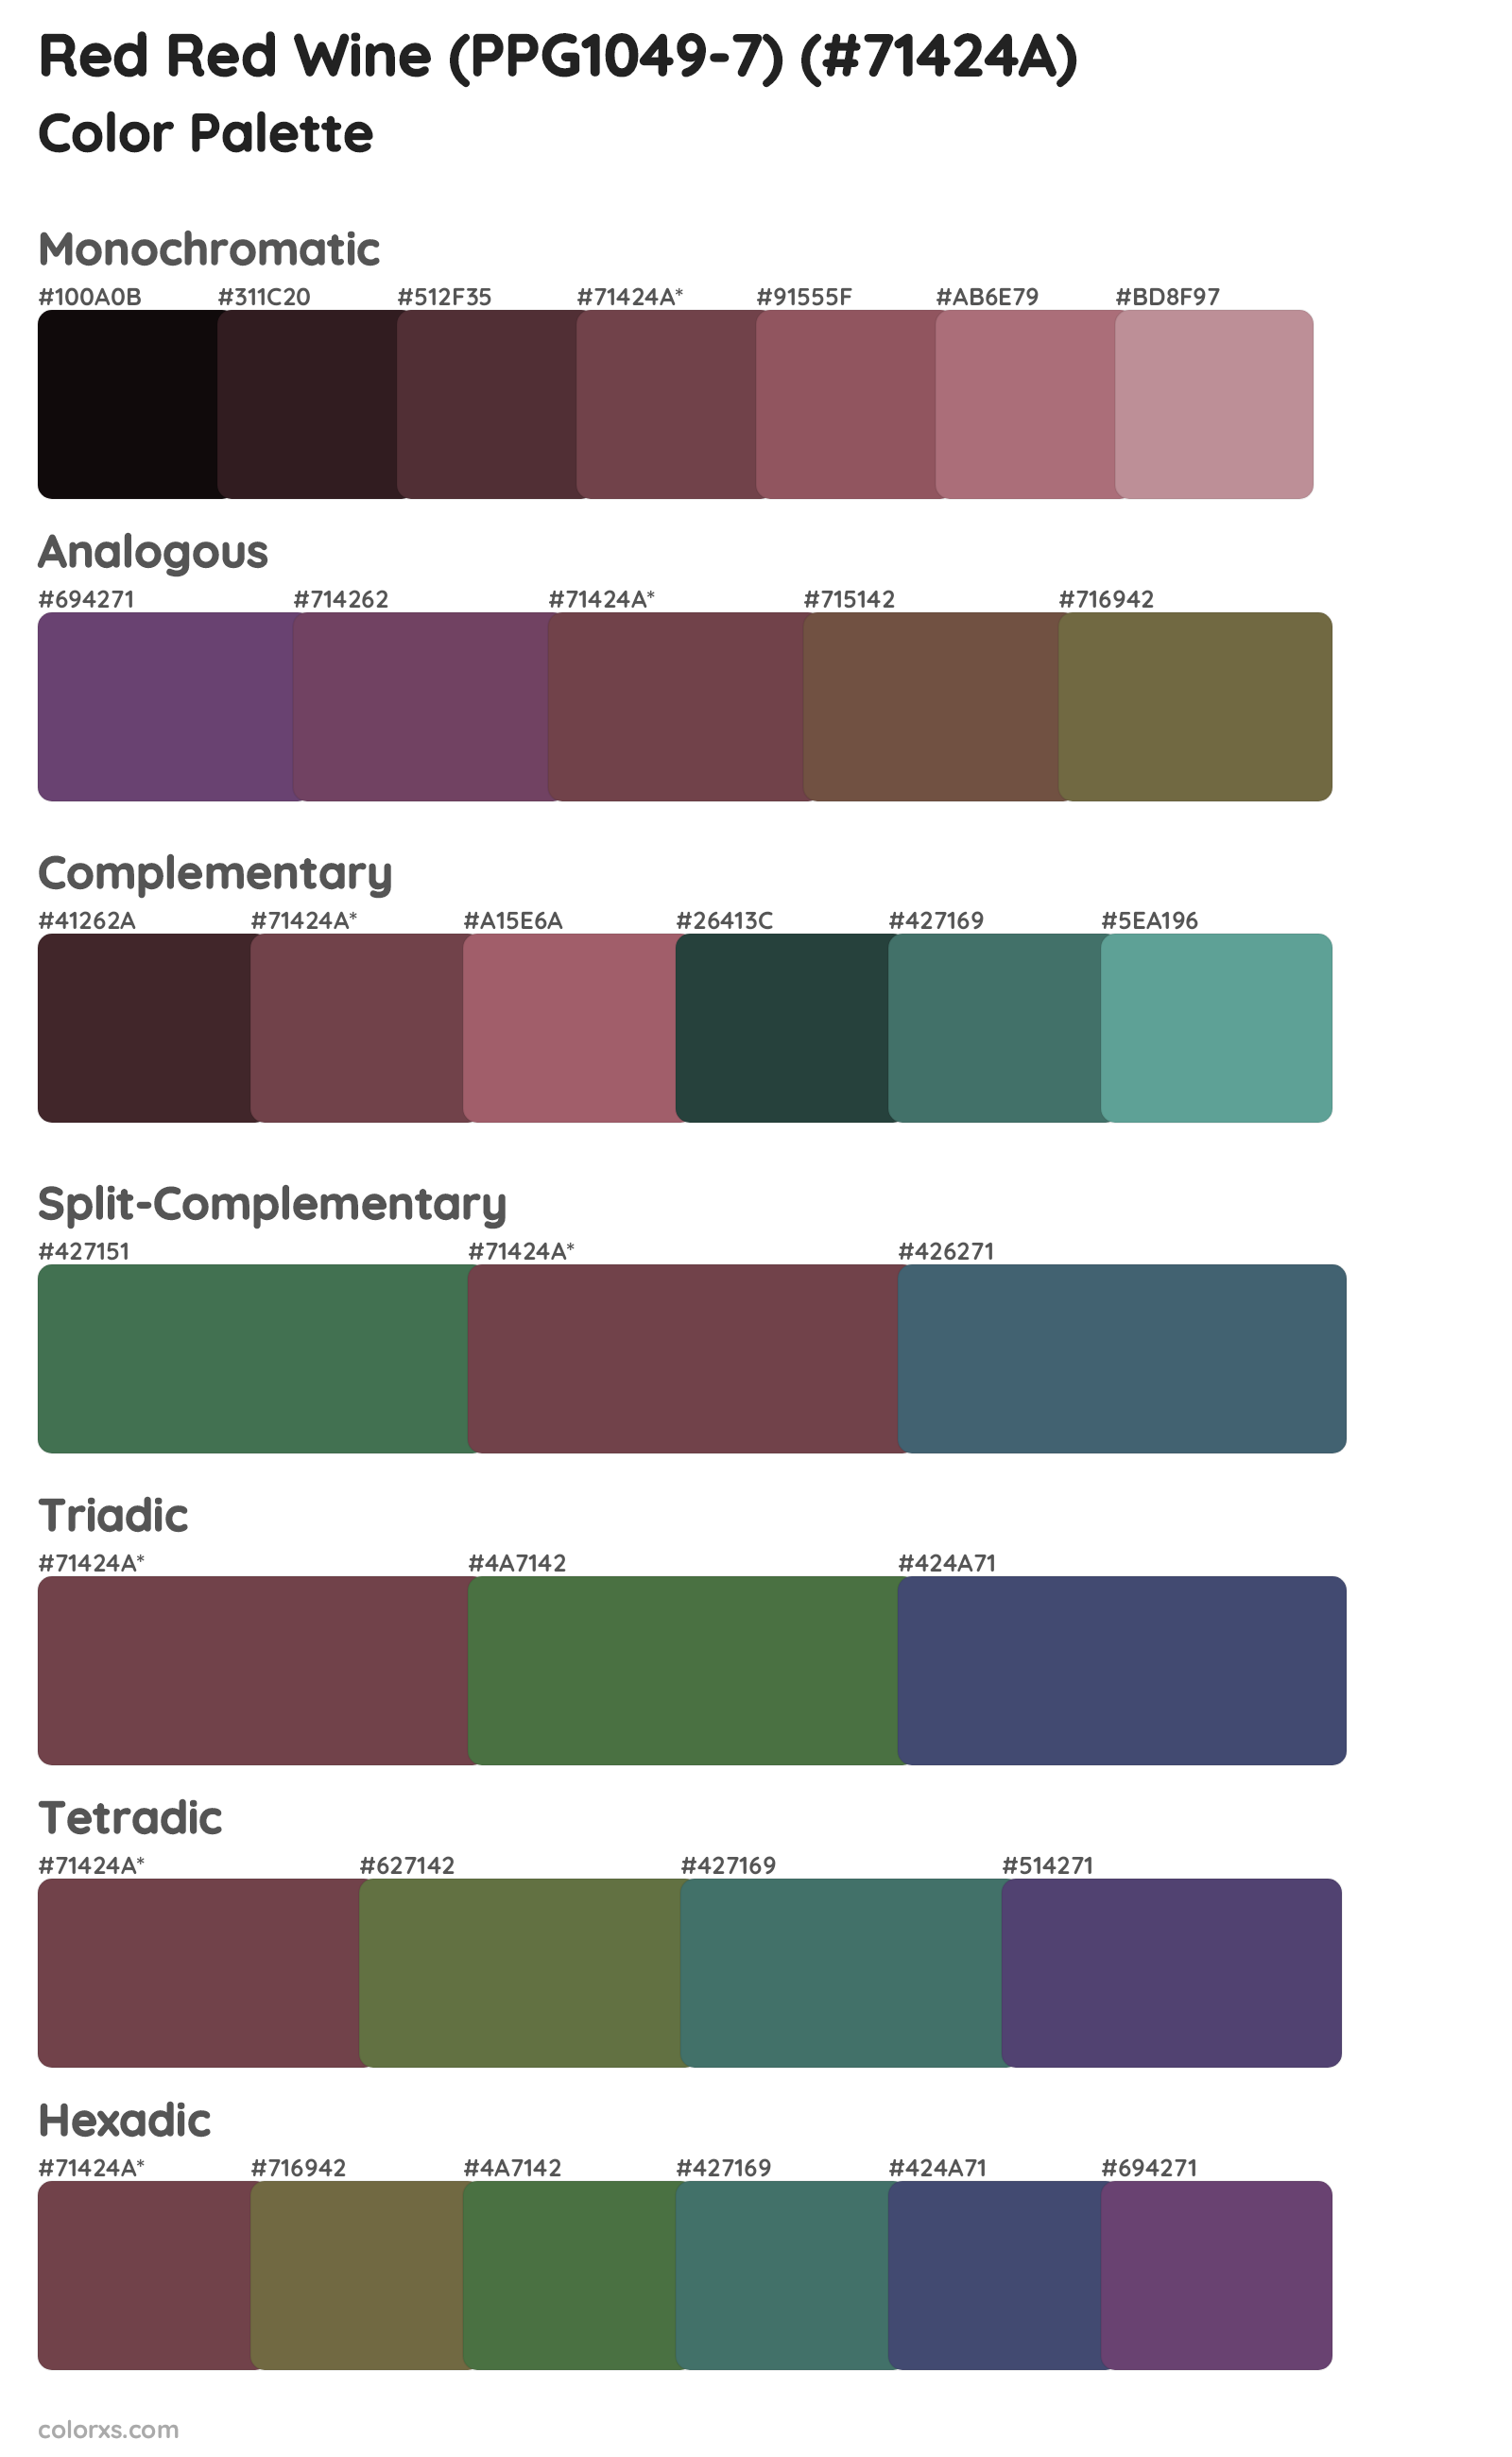 Red Red Wine (PPG1049-7) Color Scheme Palettes